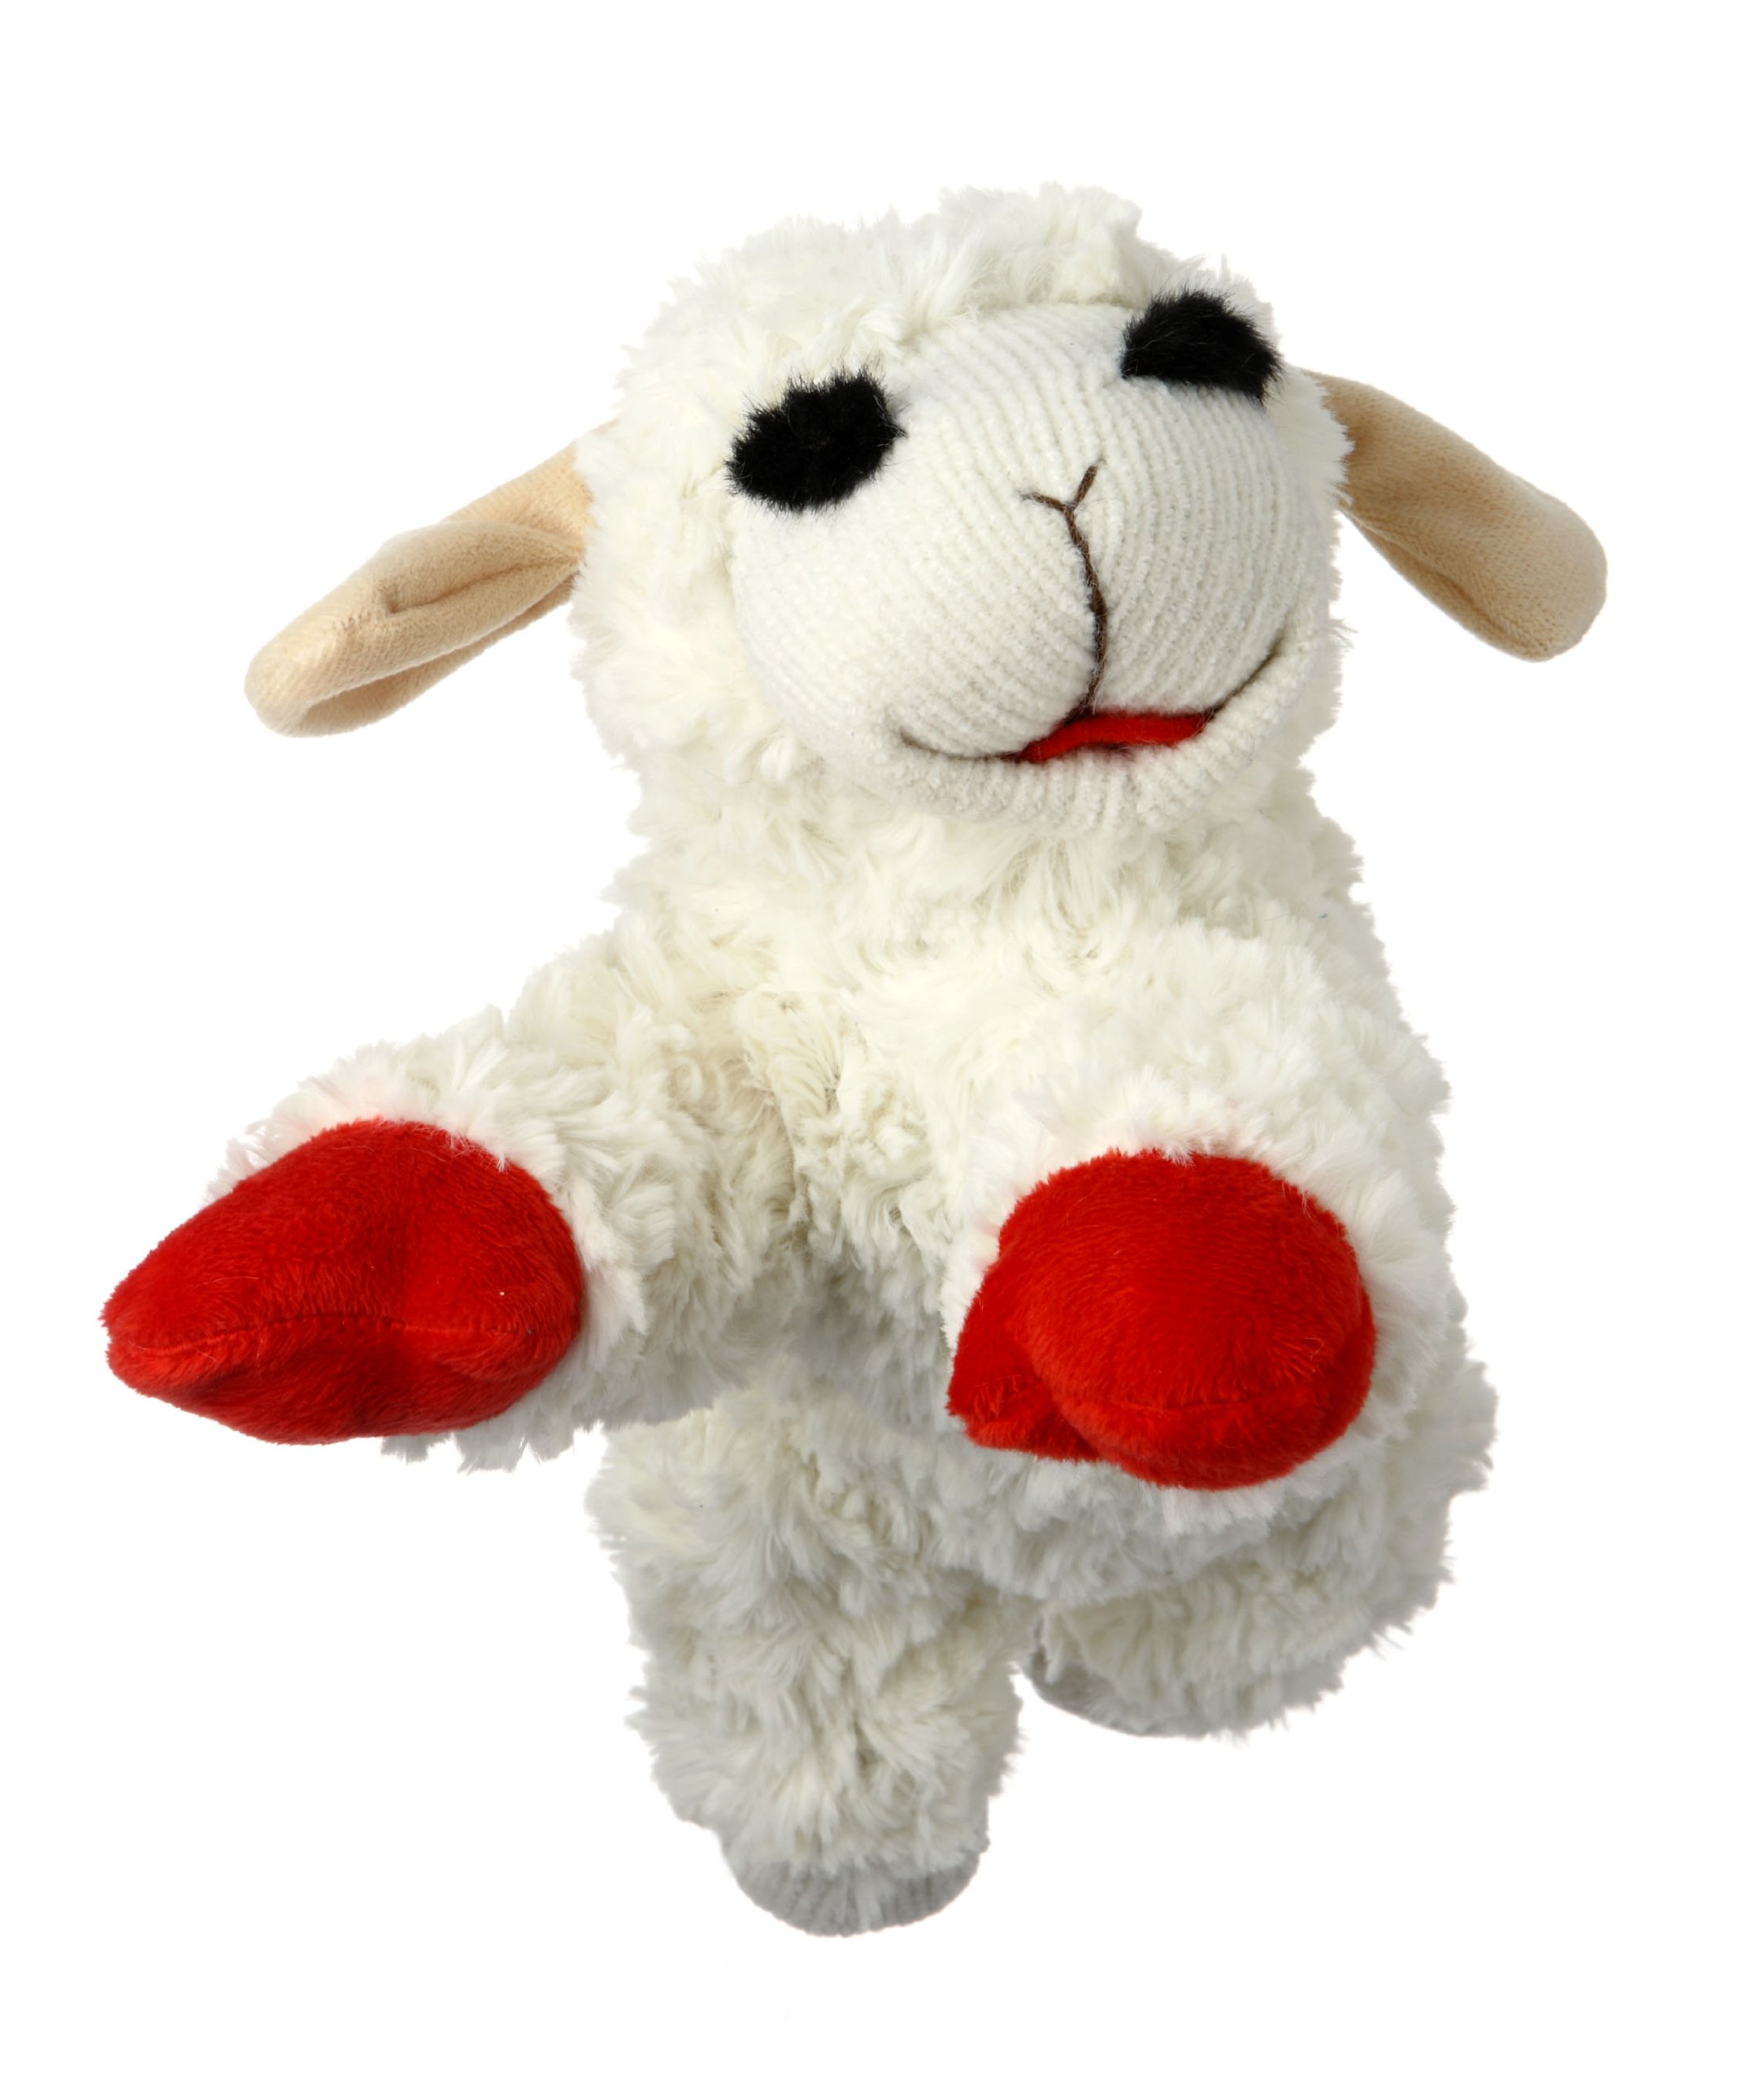 10" Multipet Lambchop Plush Squeaker Dog Toy $3.50 + Free Shipping w/ Prime or $25+